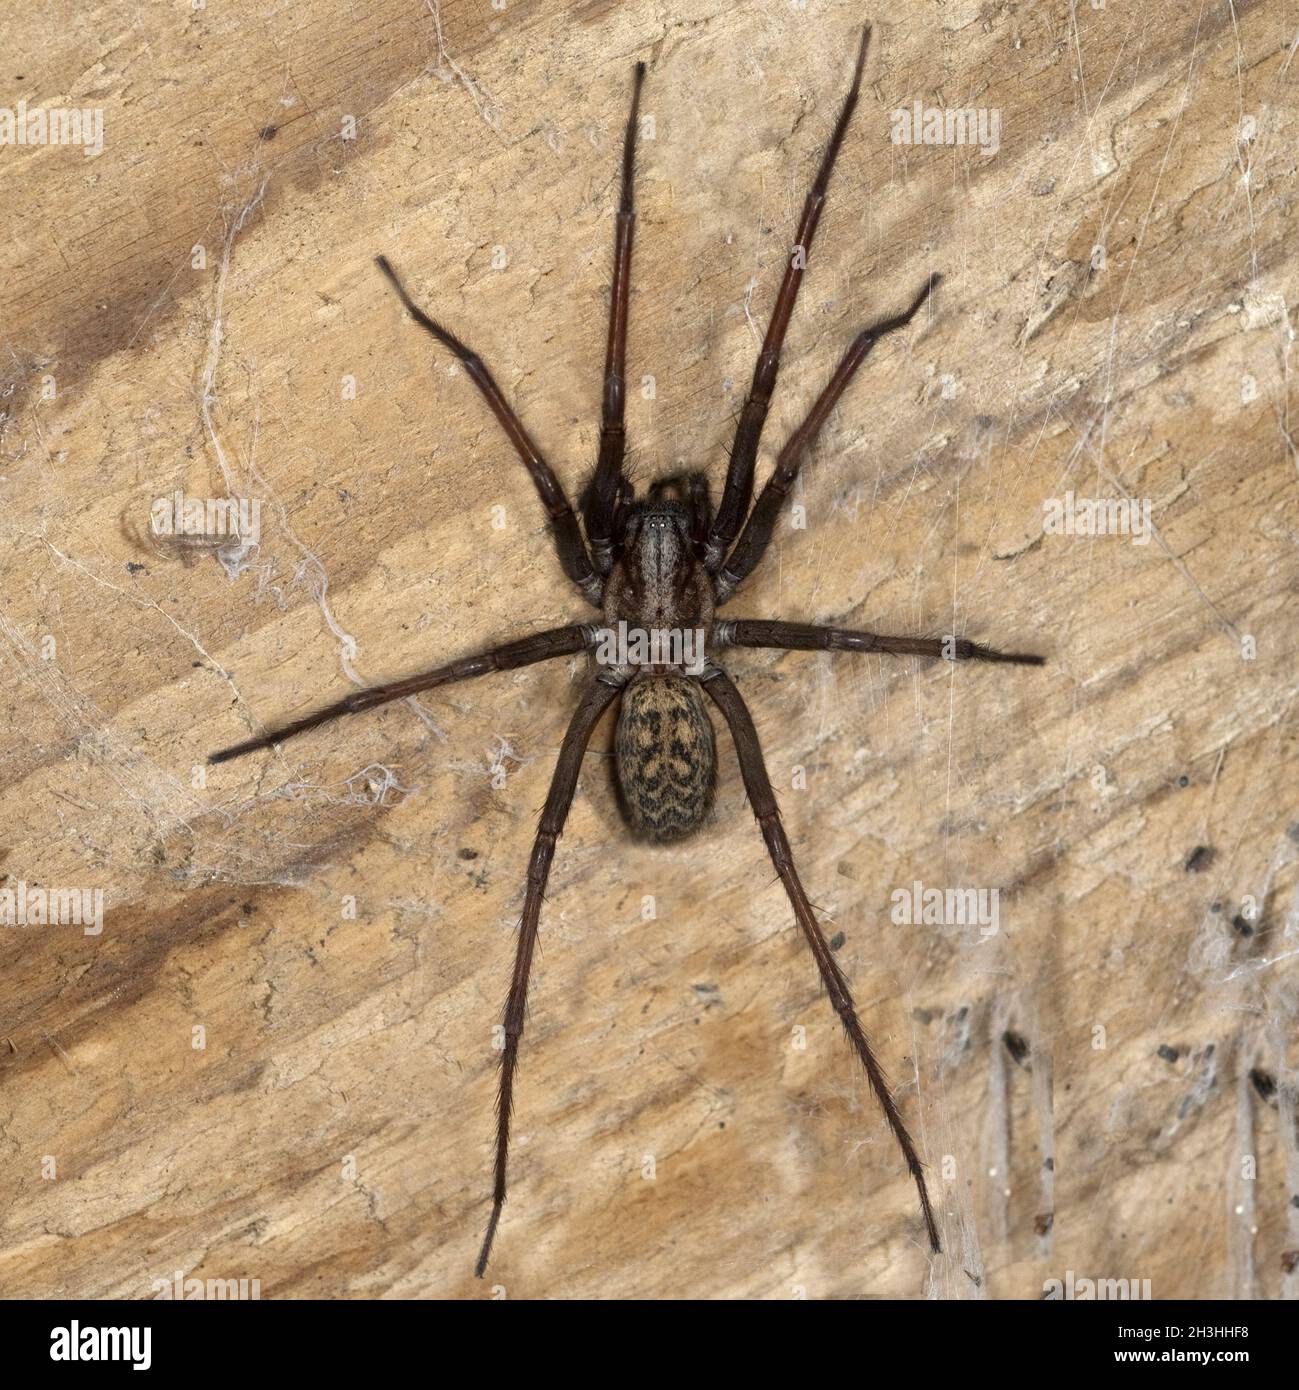 House spider, large, angle spider, funnel web spider, Tegenaria atrica, Stock Photo